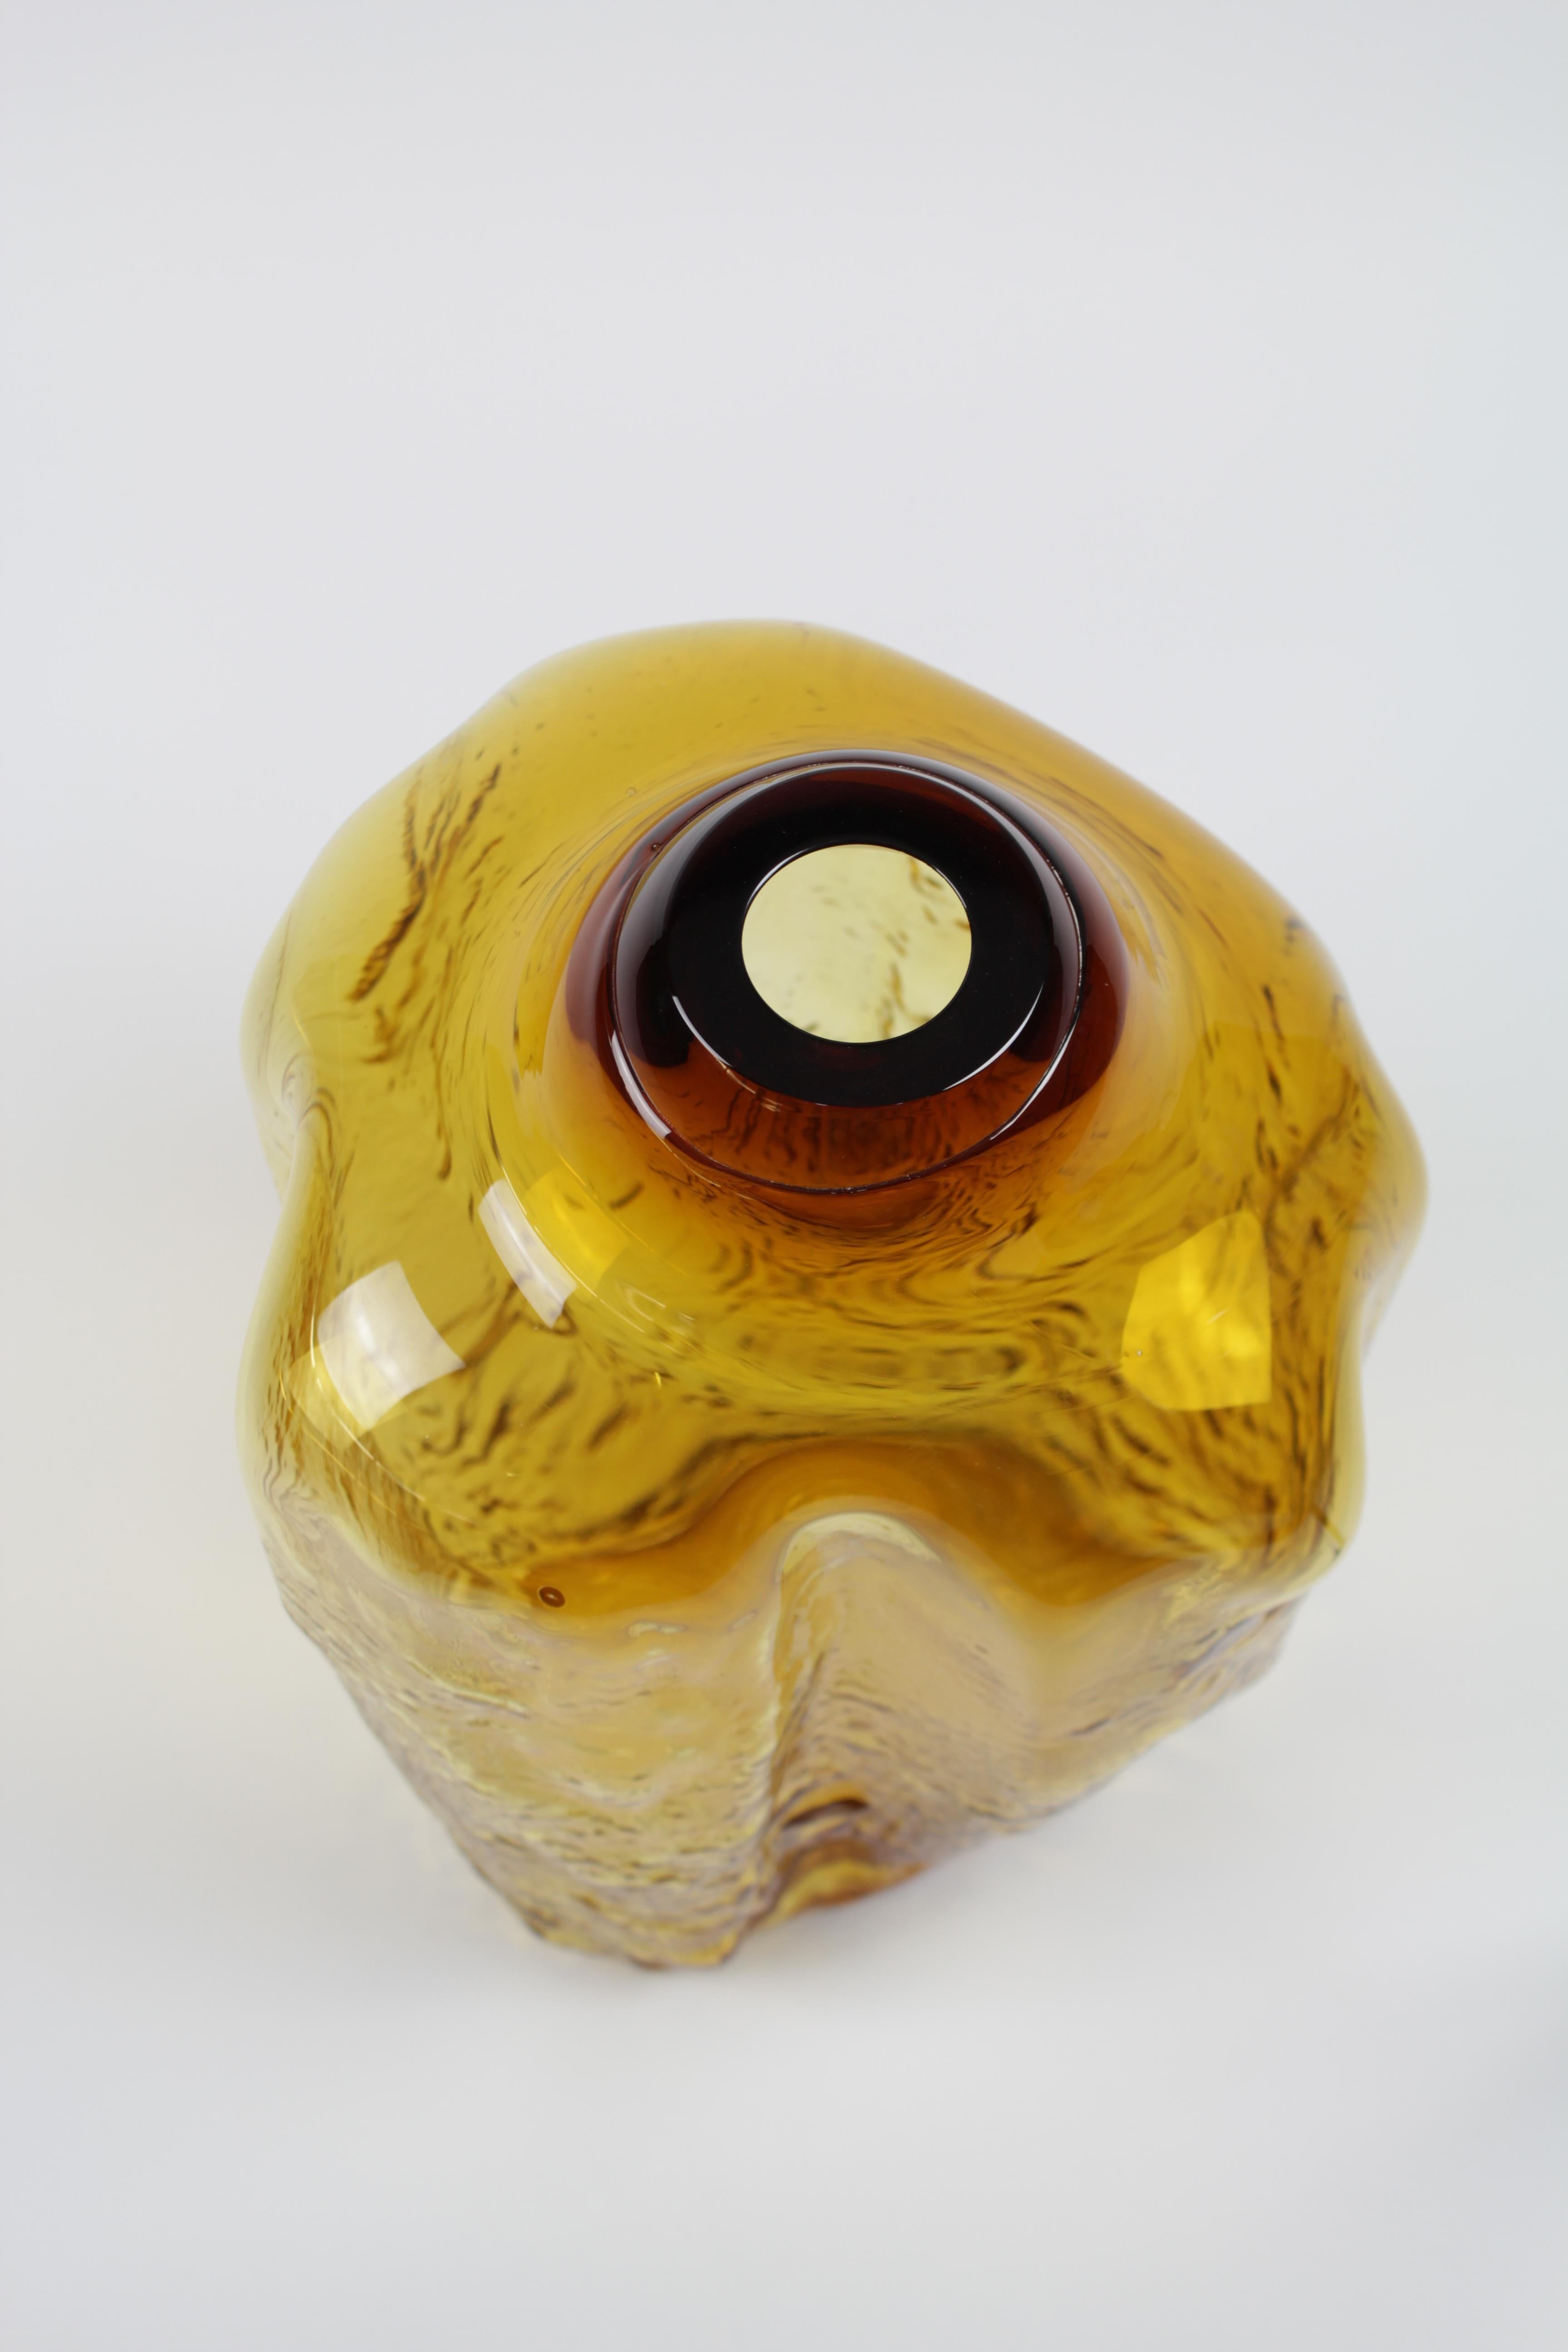 Sand Series, Brilliant Gold, Handmade Glass Object by Vogel Studio In New Condition For Sale In Sarstedt, NI